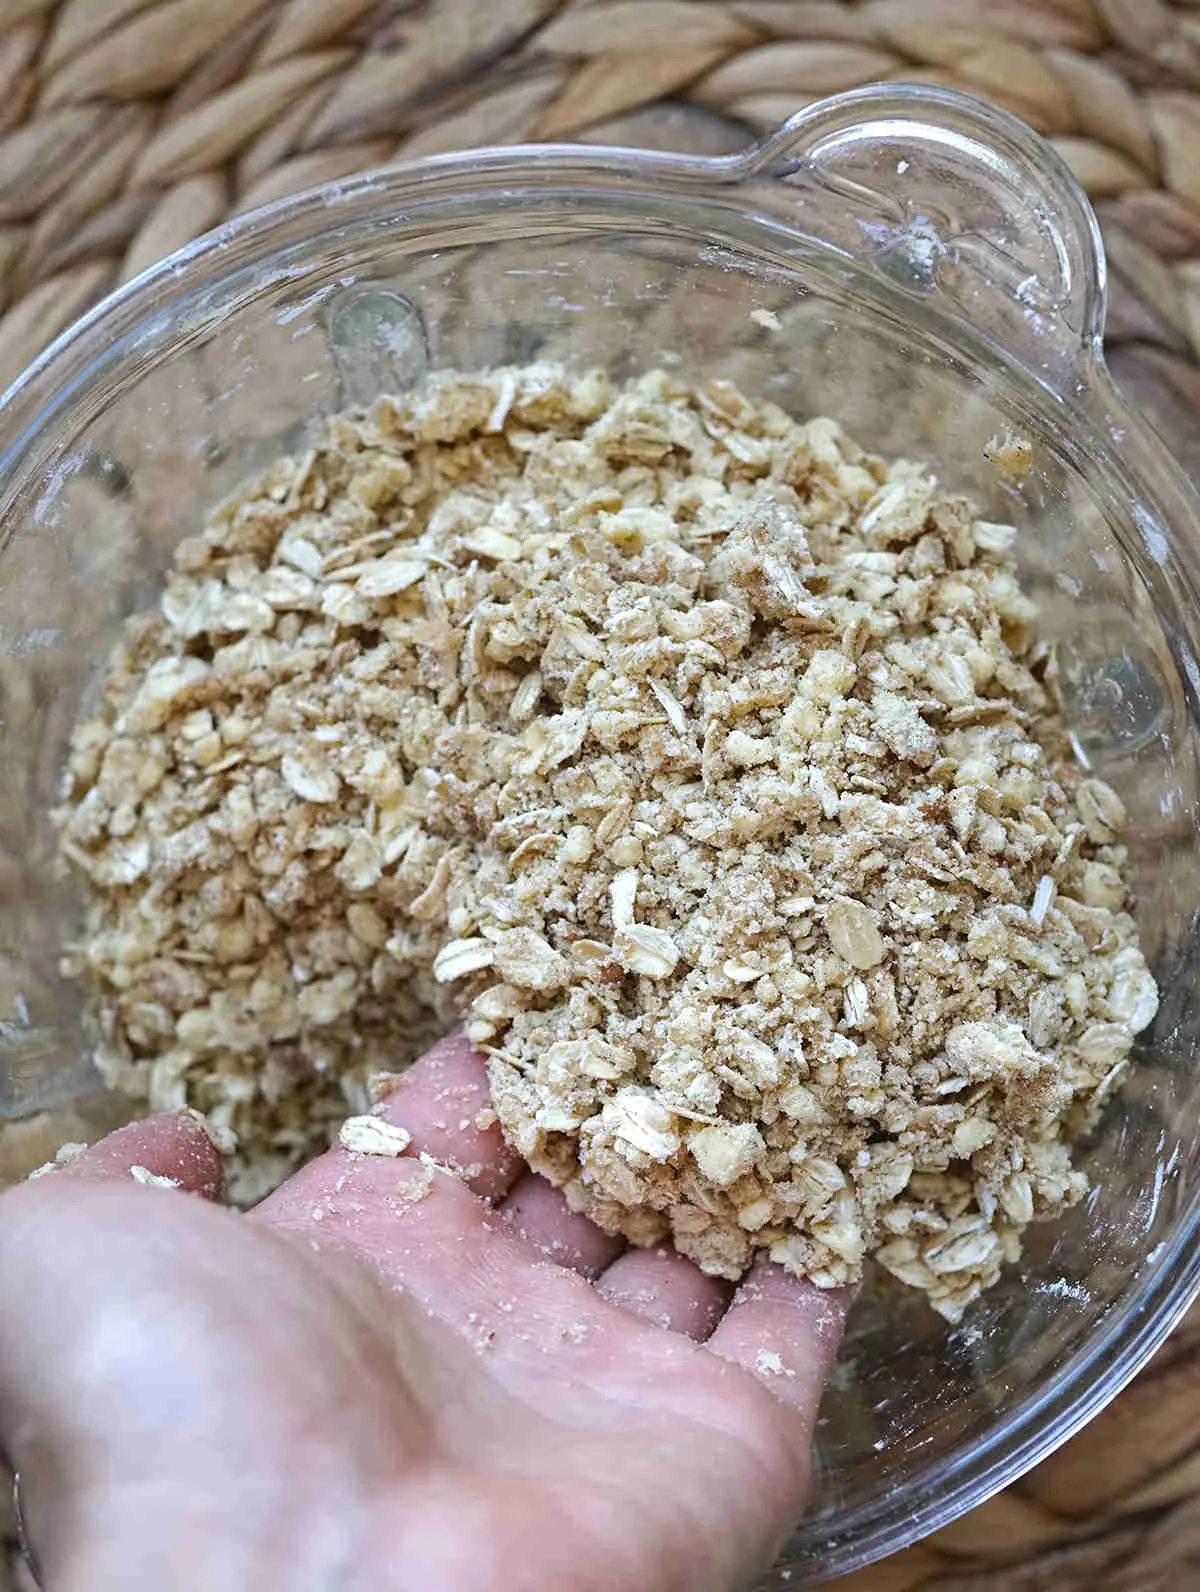 Picture showing how the texture of this crumble topping should look like before baking.